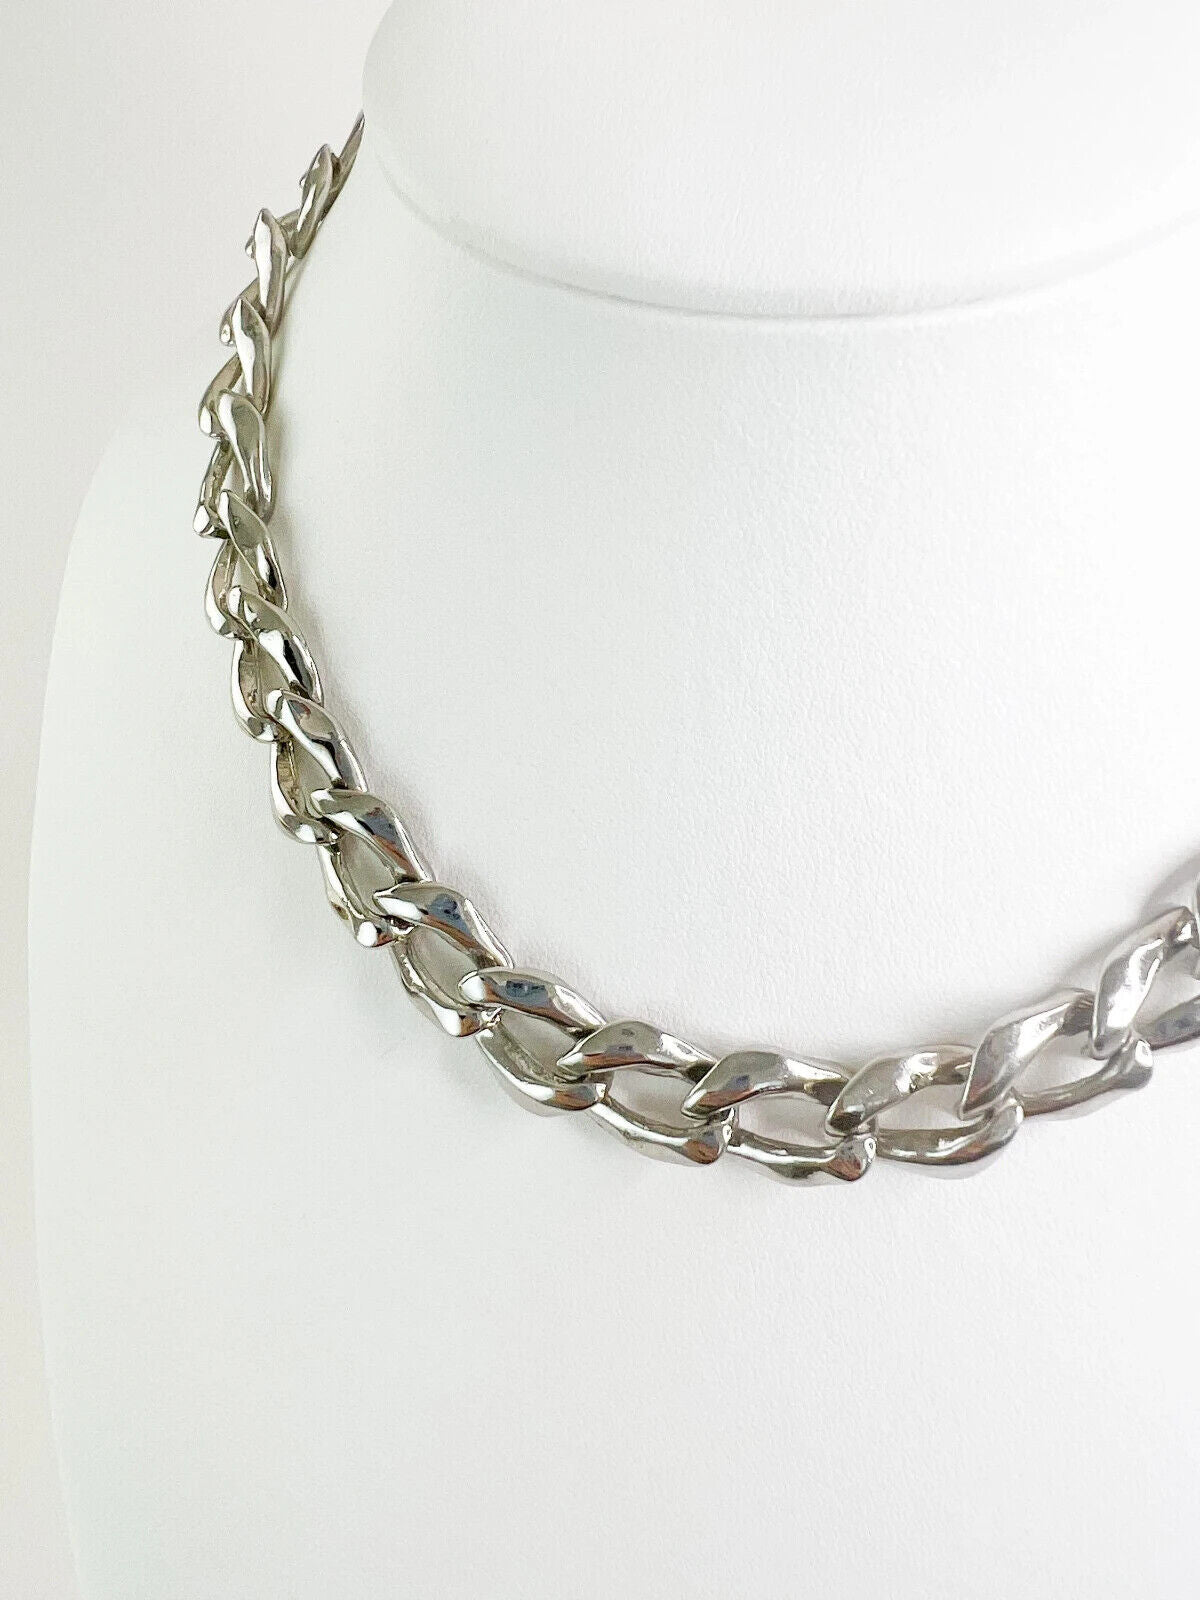 Vintage YSL Yves Saint Laurent Necklace, YSL Chain Necklace Silver, Choker Necklace, Chunky chain silver, Necklace unisex, Gift for him